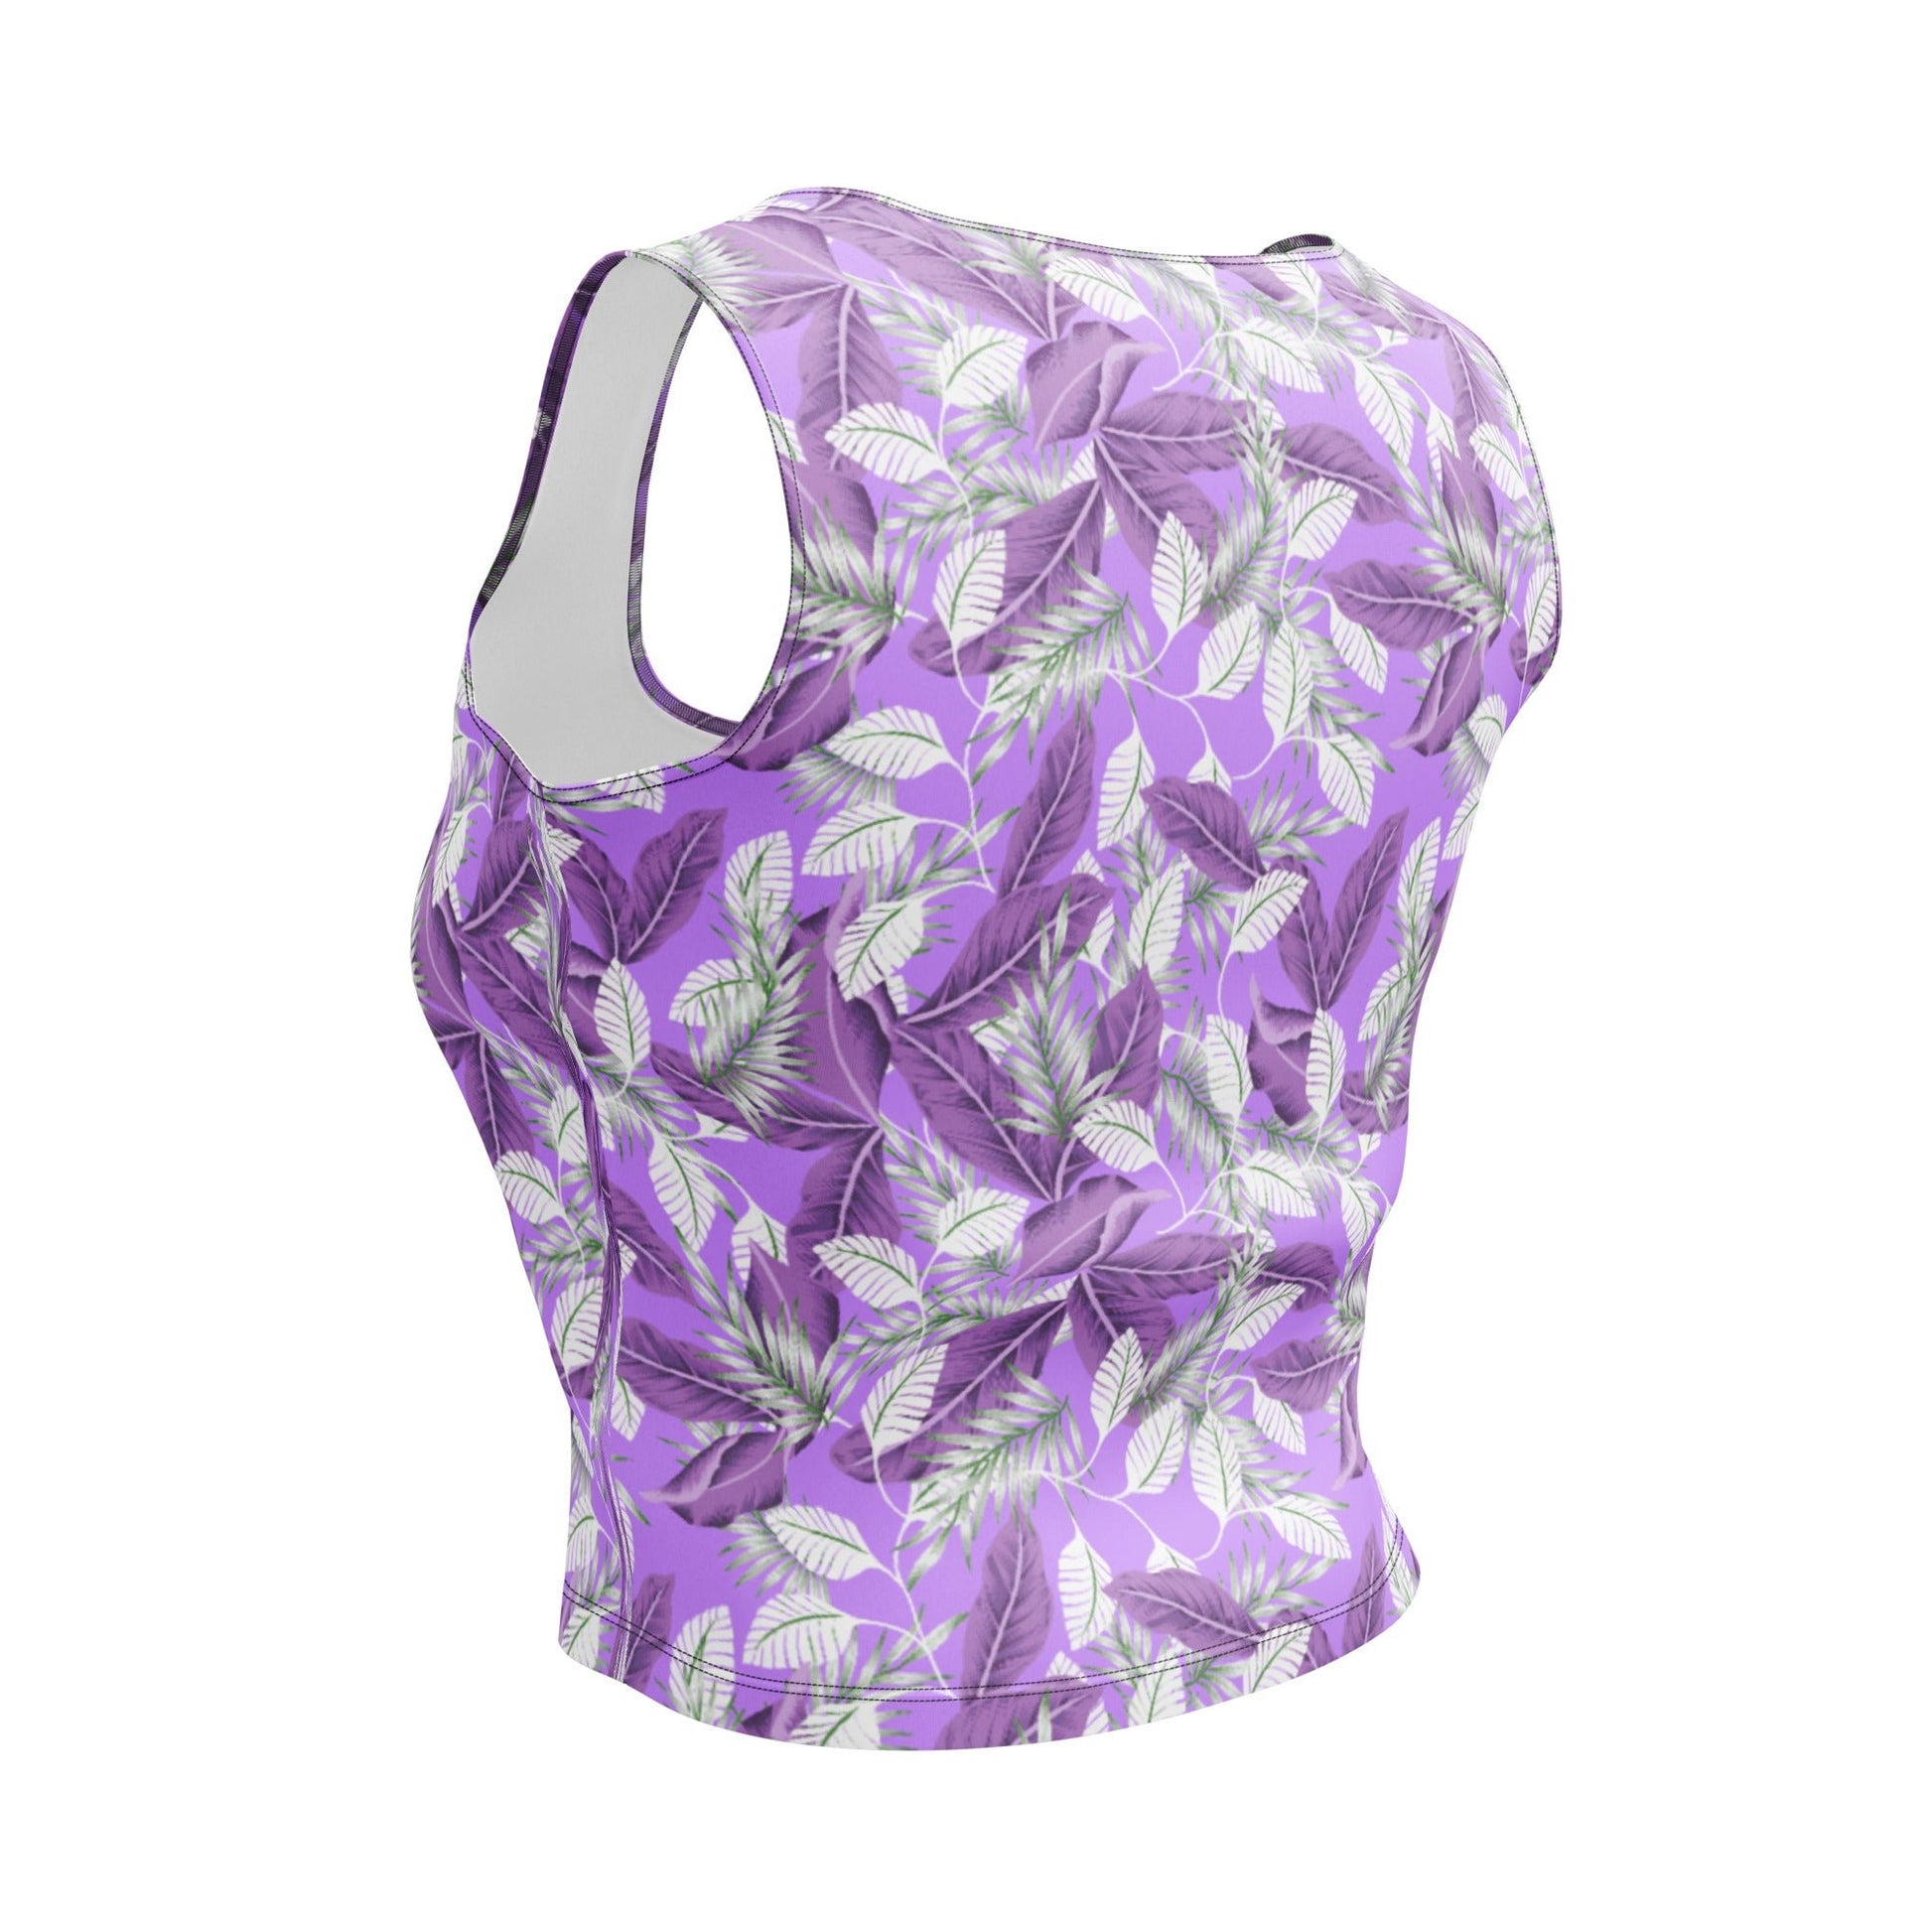 Be Extra! Floral Purple Crop Top - BeExtra! Apparel & More